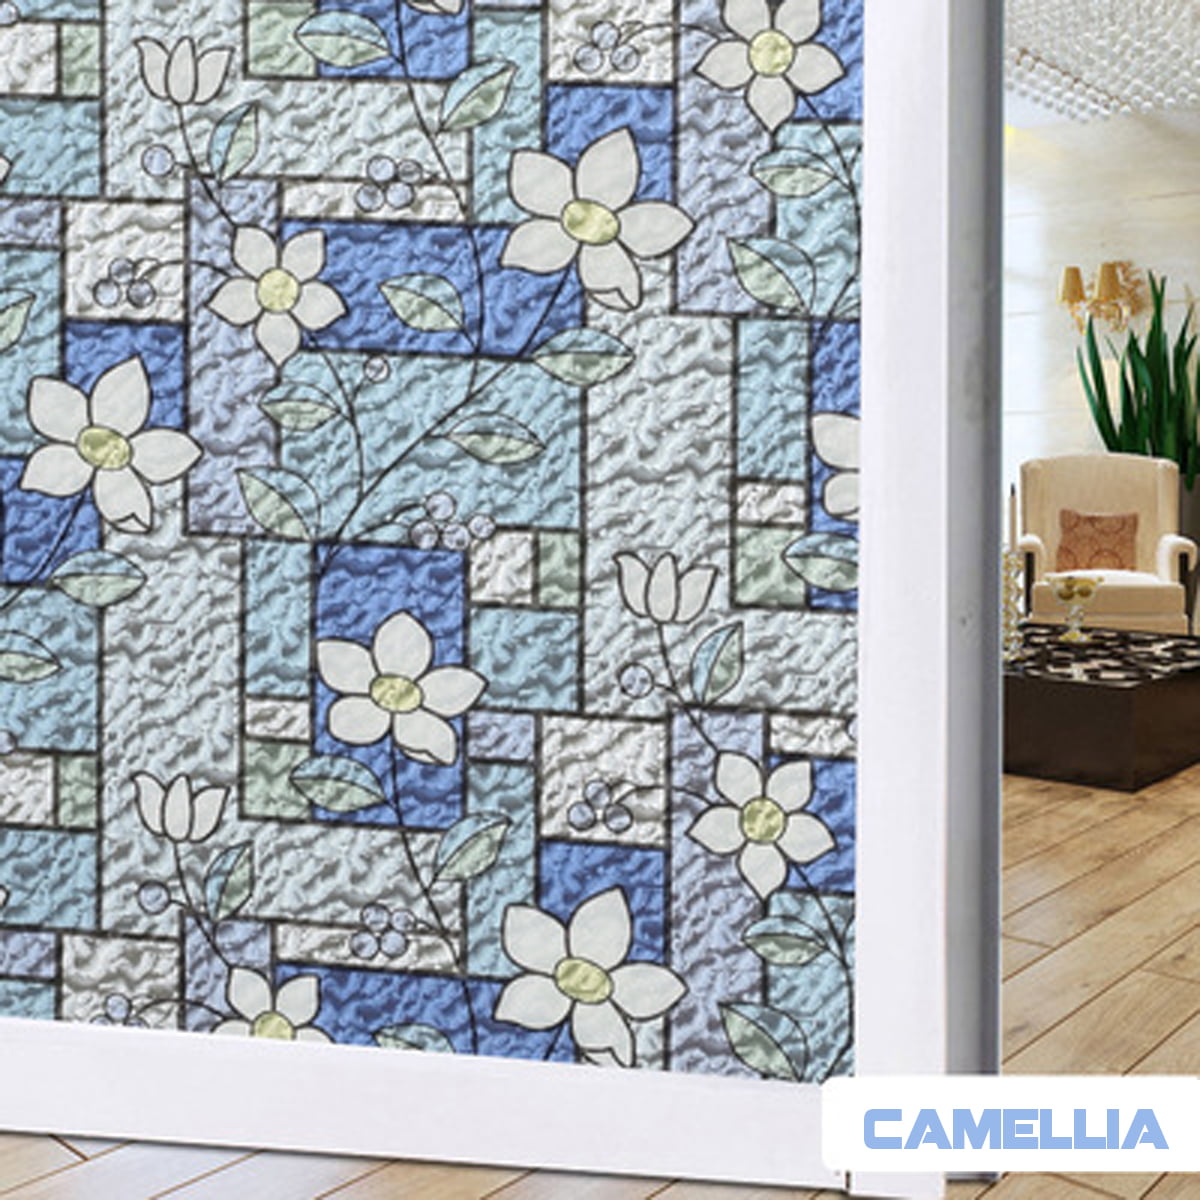 Little Flower Tile Glass Film Blue Small Flower Tile Mosaic Style Privacy Window Film Non-Adhesive Frosted Decorative Glass Film Static Cling Film for Bathroom Shower Room